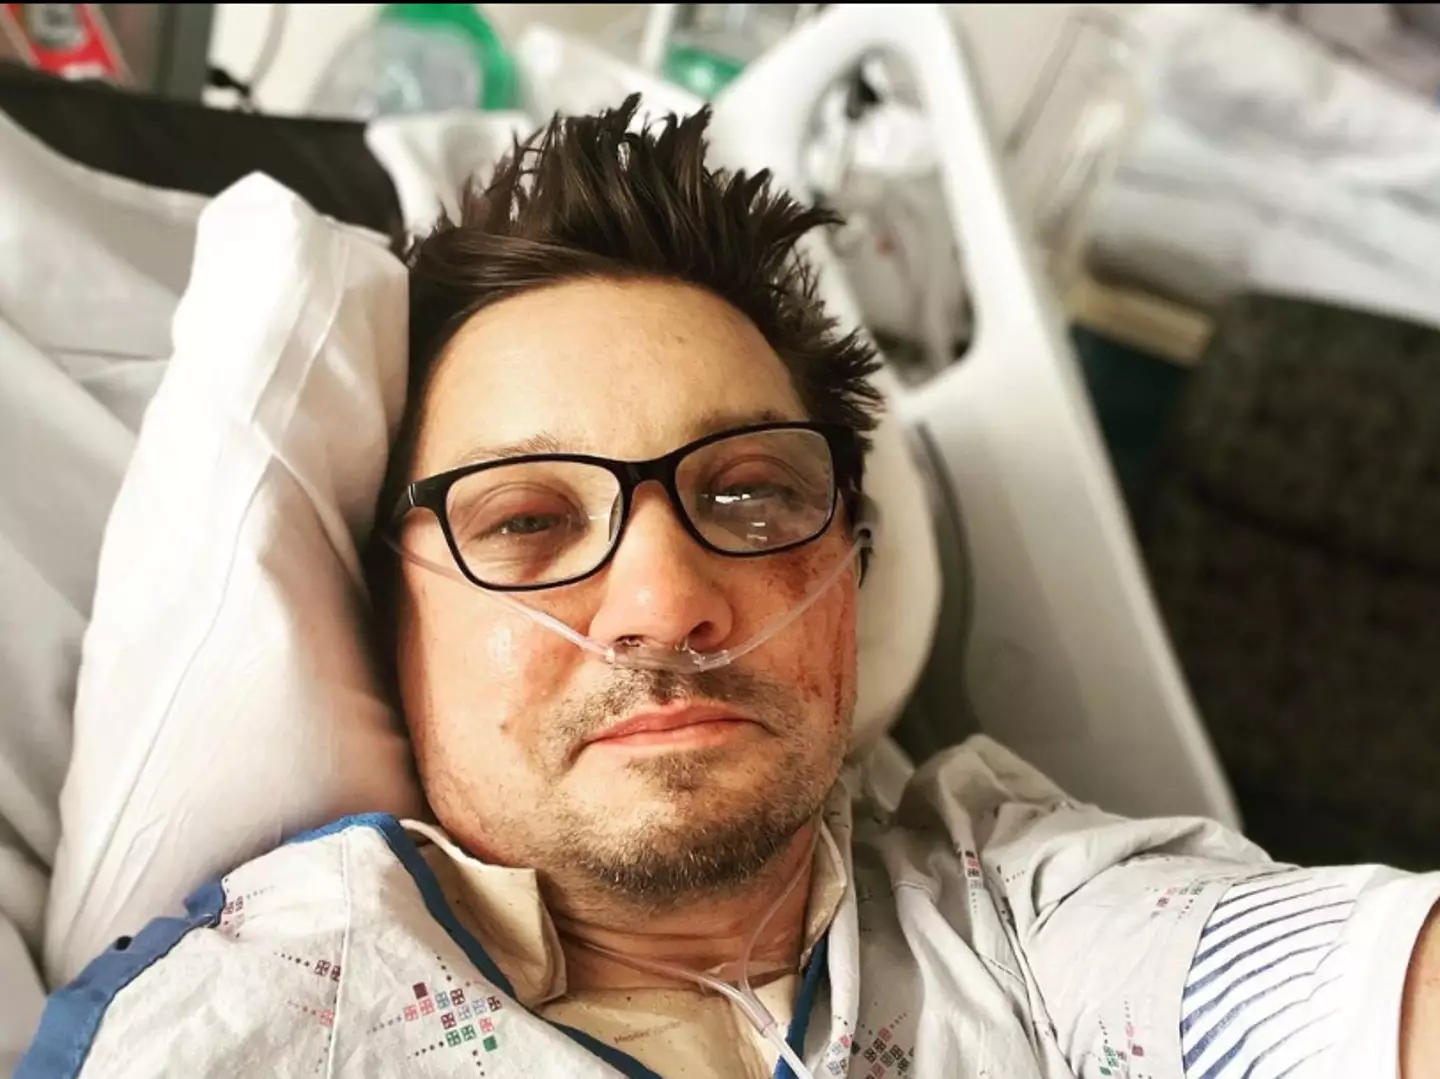 Jeremy Renner was hospitalised in the accident.